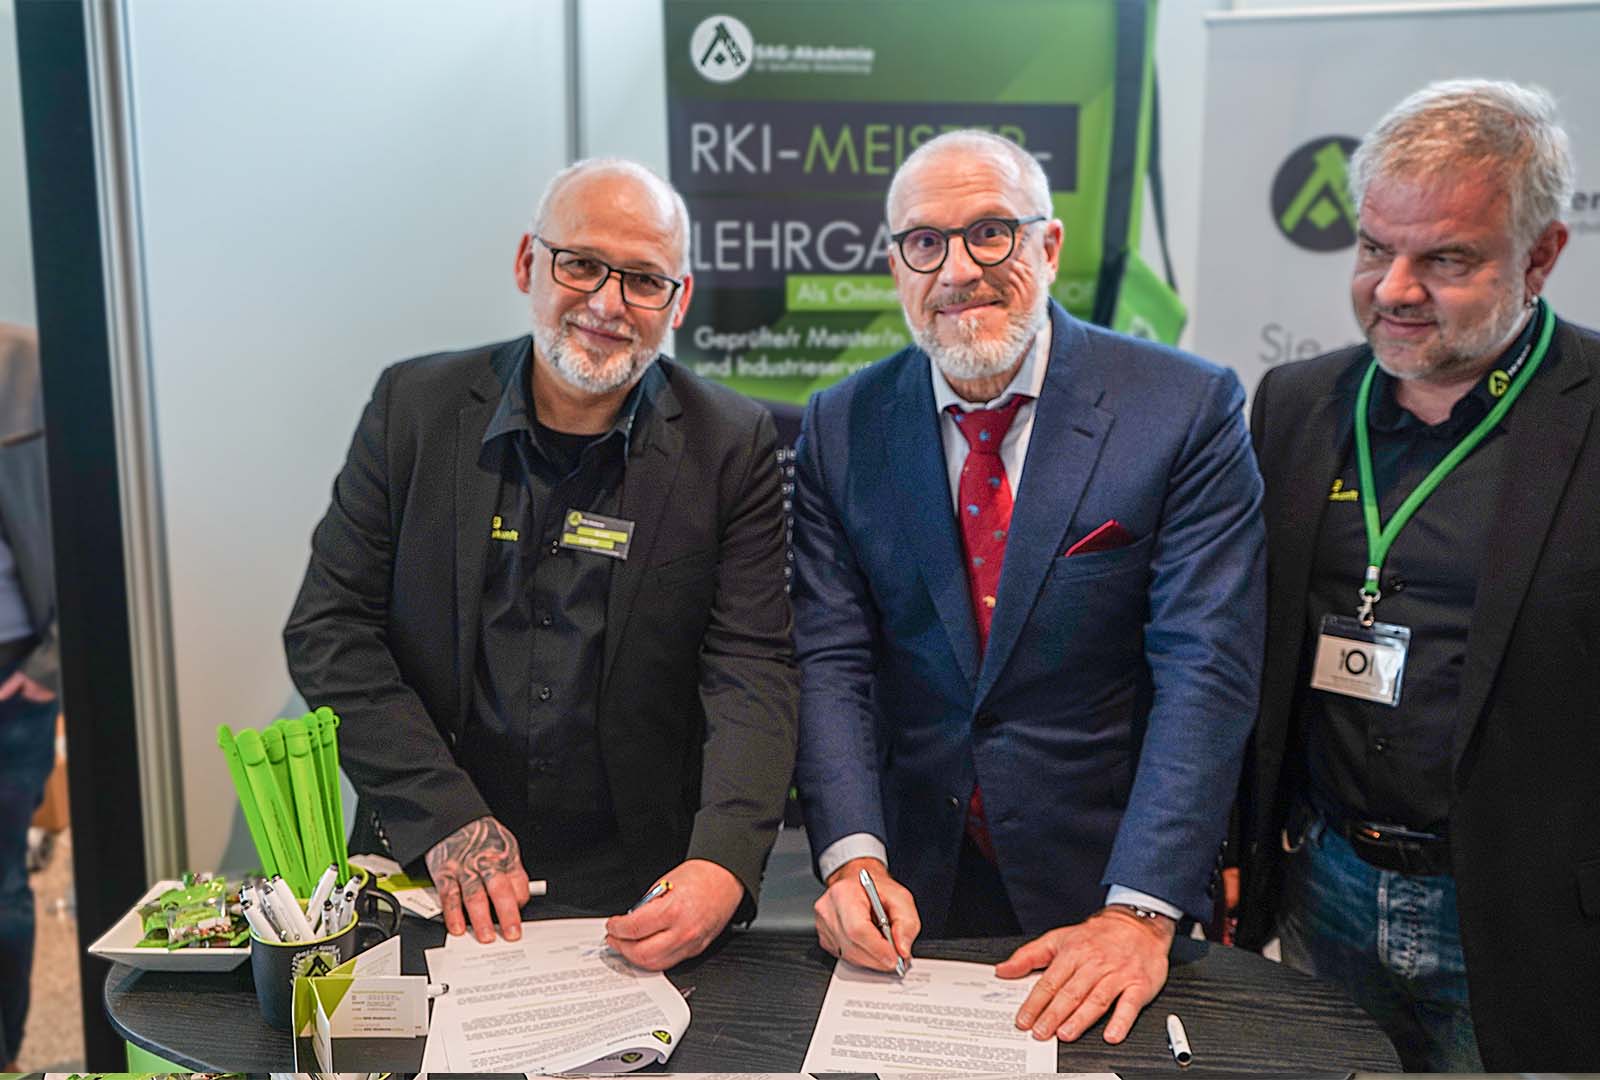 Three men signing documents at a conference booth.